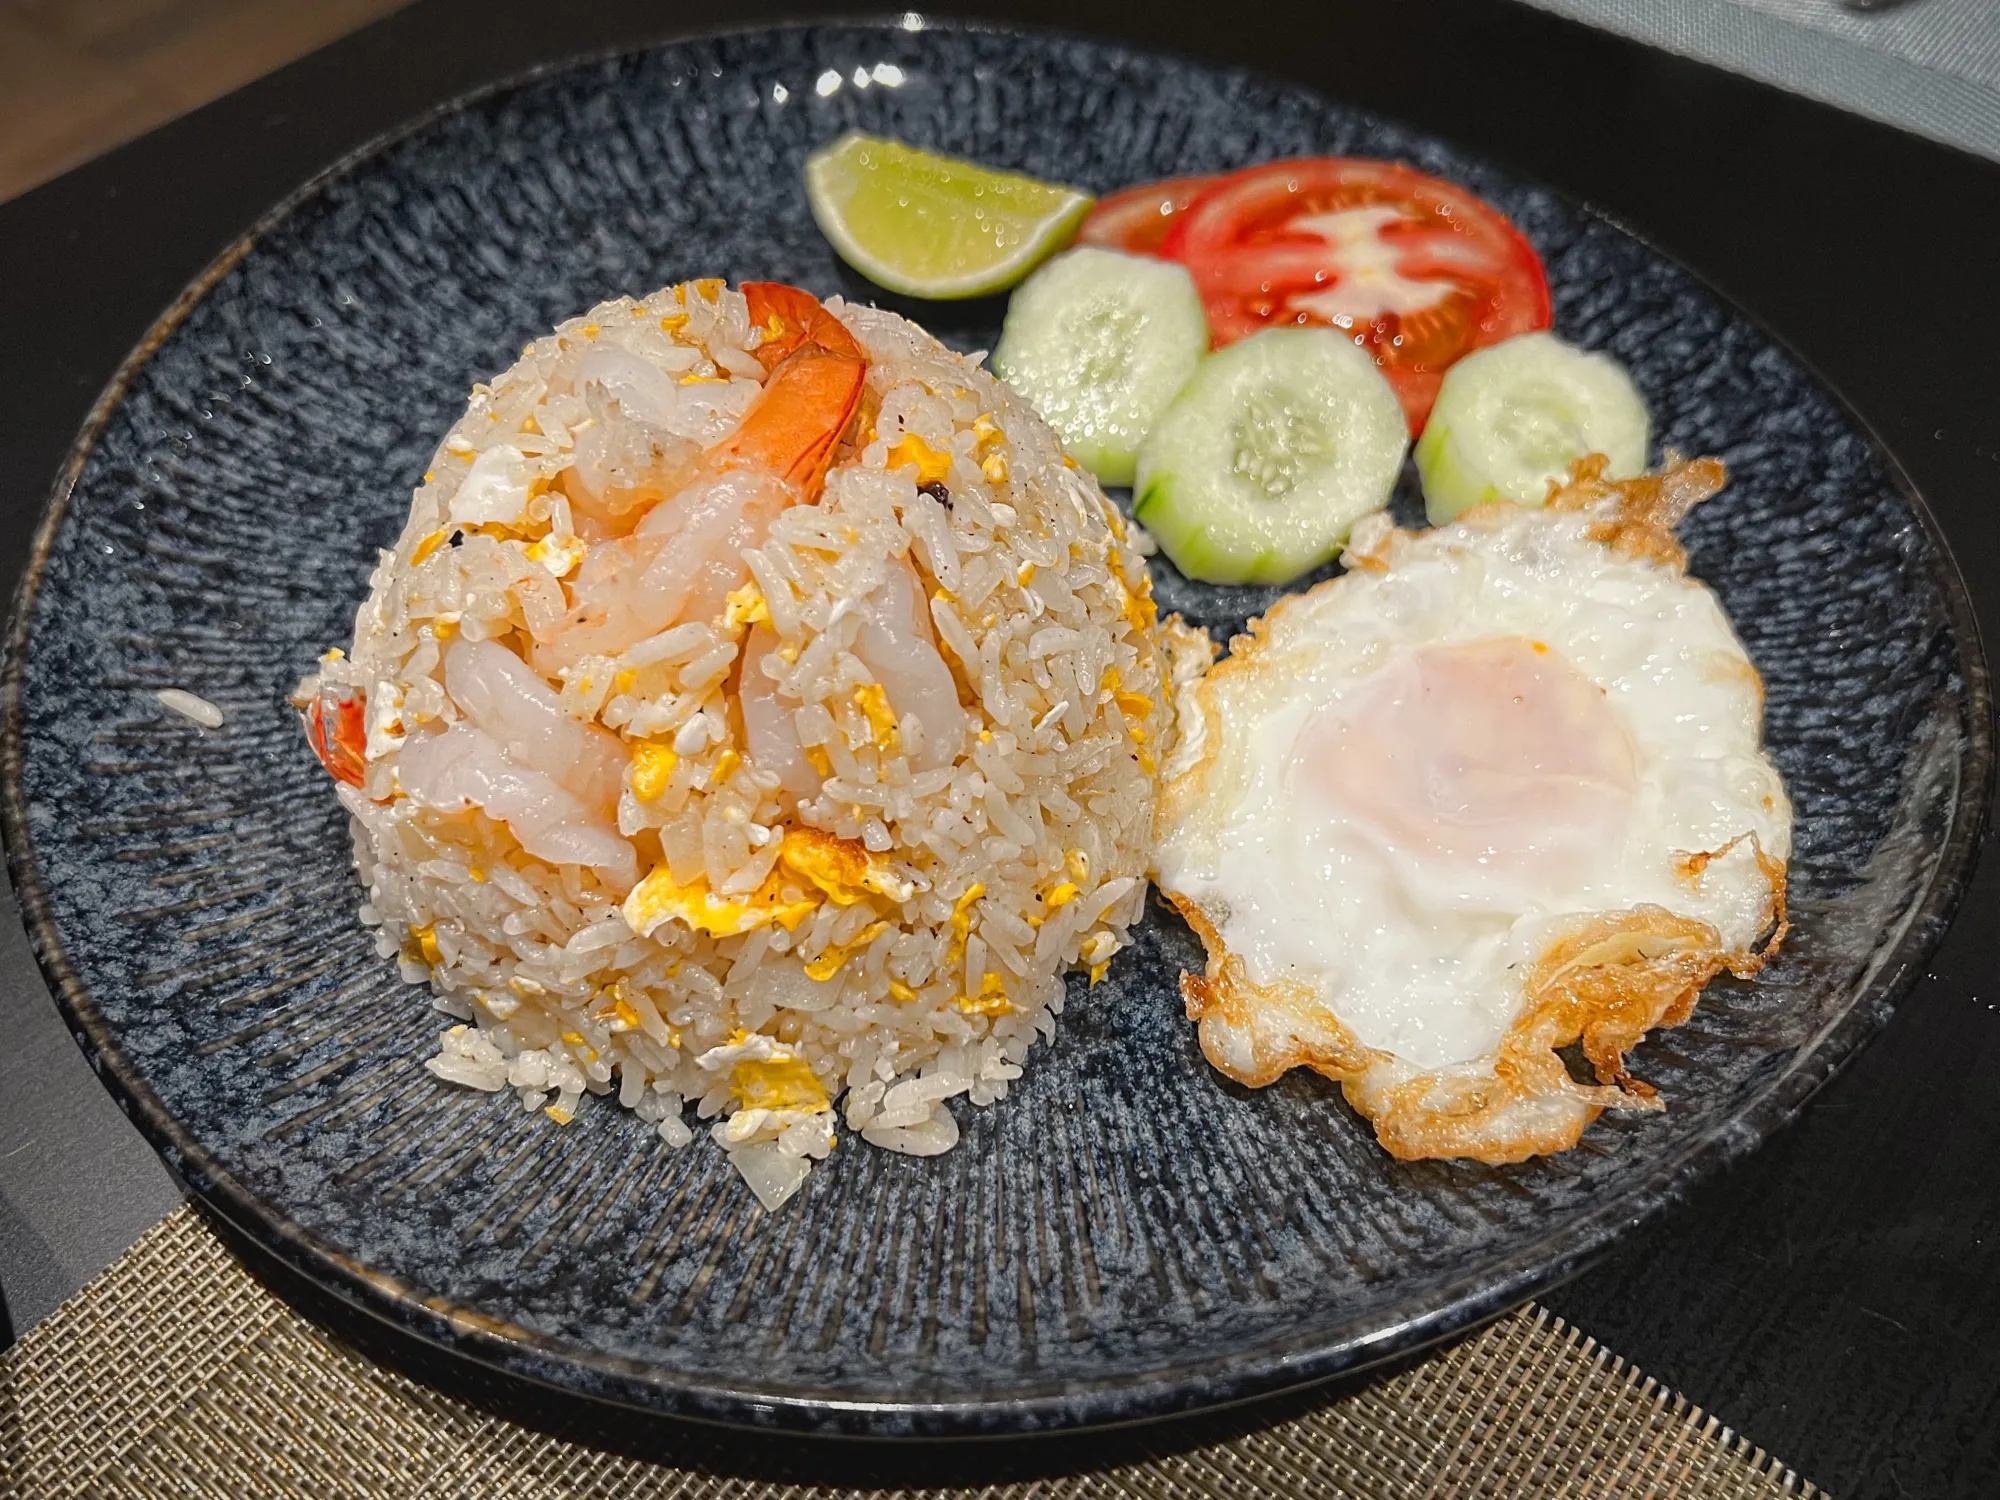 Plate with shrimp fried rice and a whole fried egg.